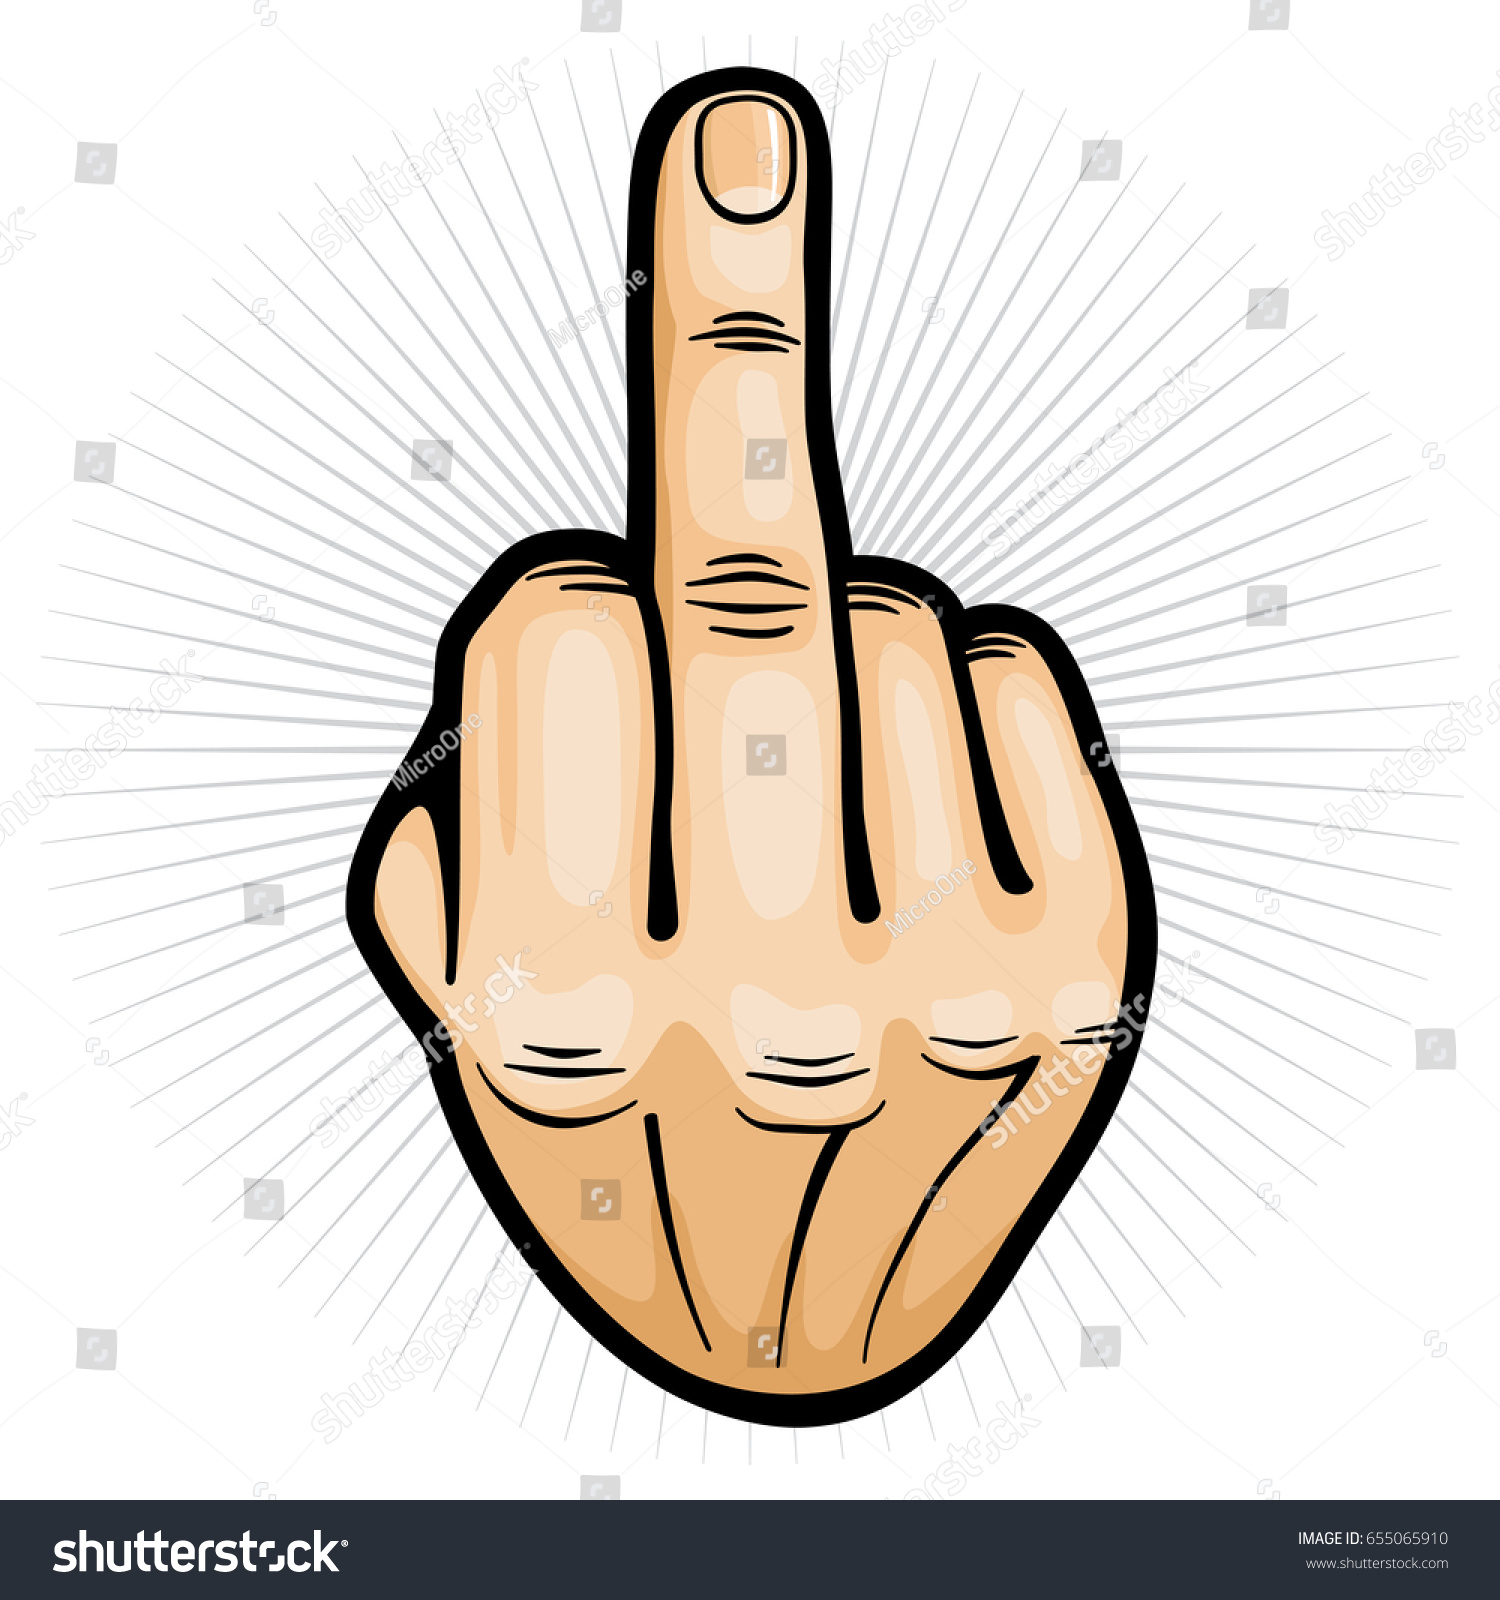 Outrageous Contempt Fuck You Hand Gesture Stock Vector Royalty Free